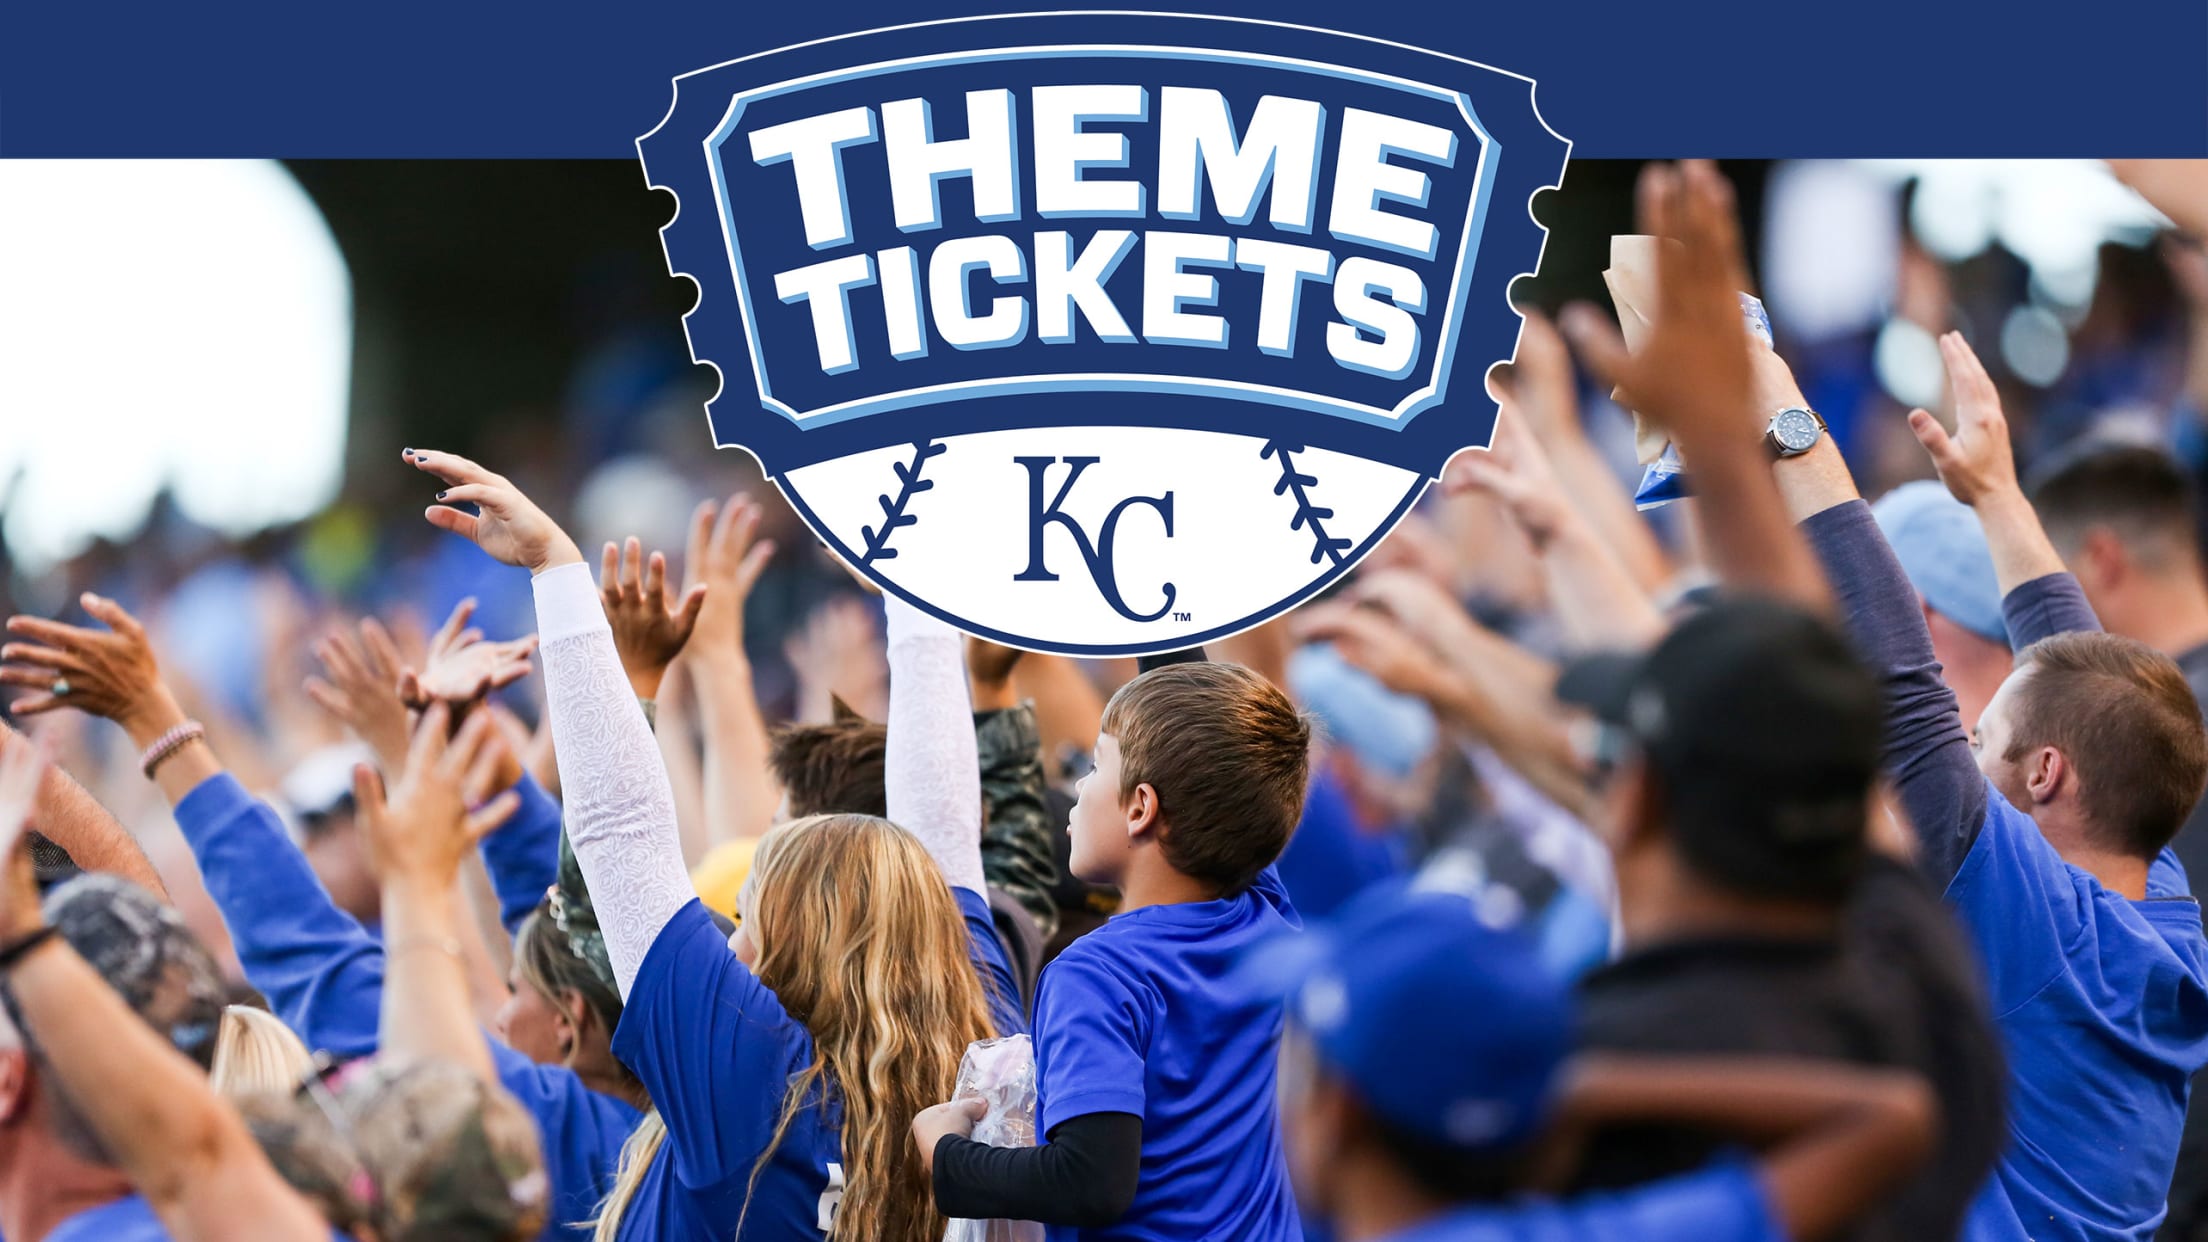 Royals Theme Tickets